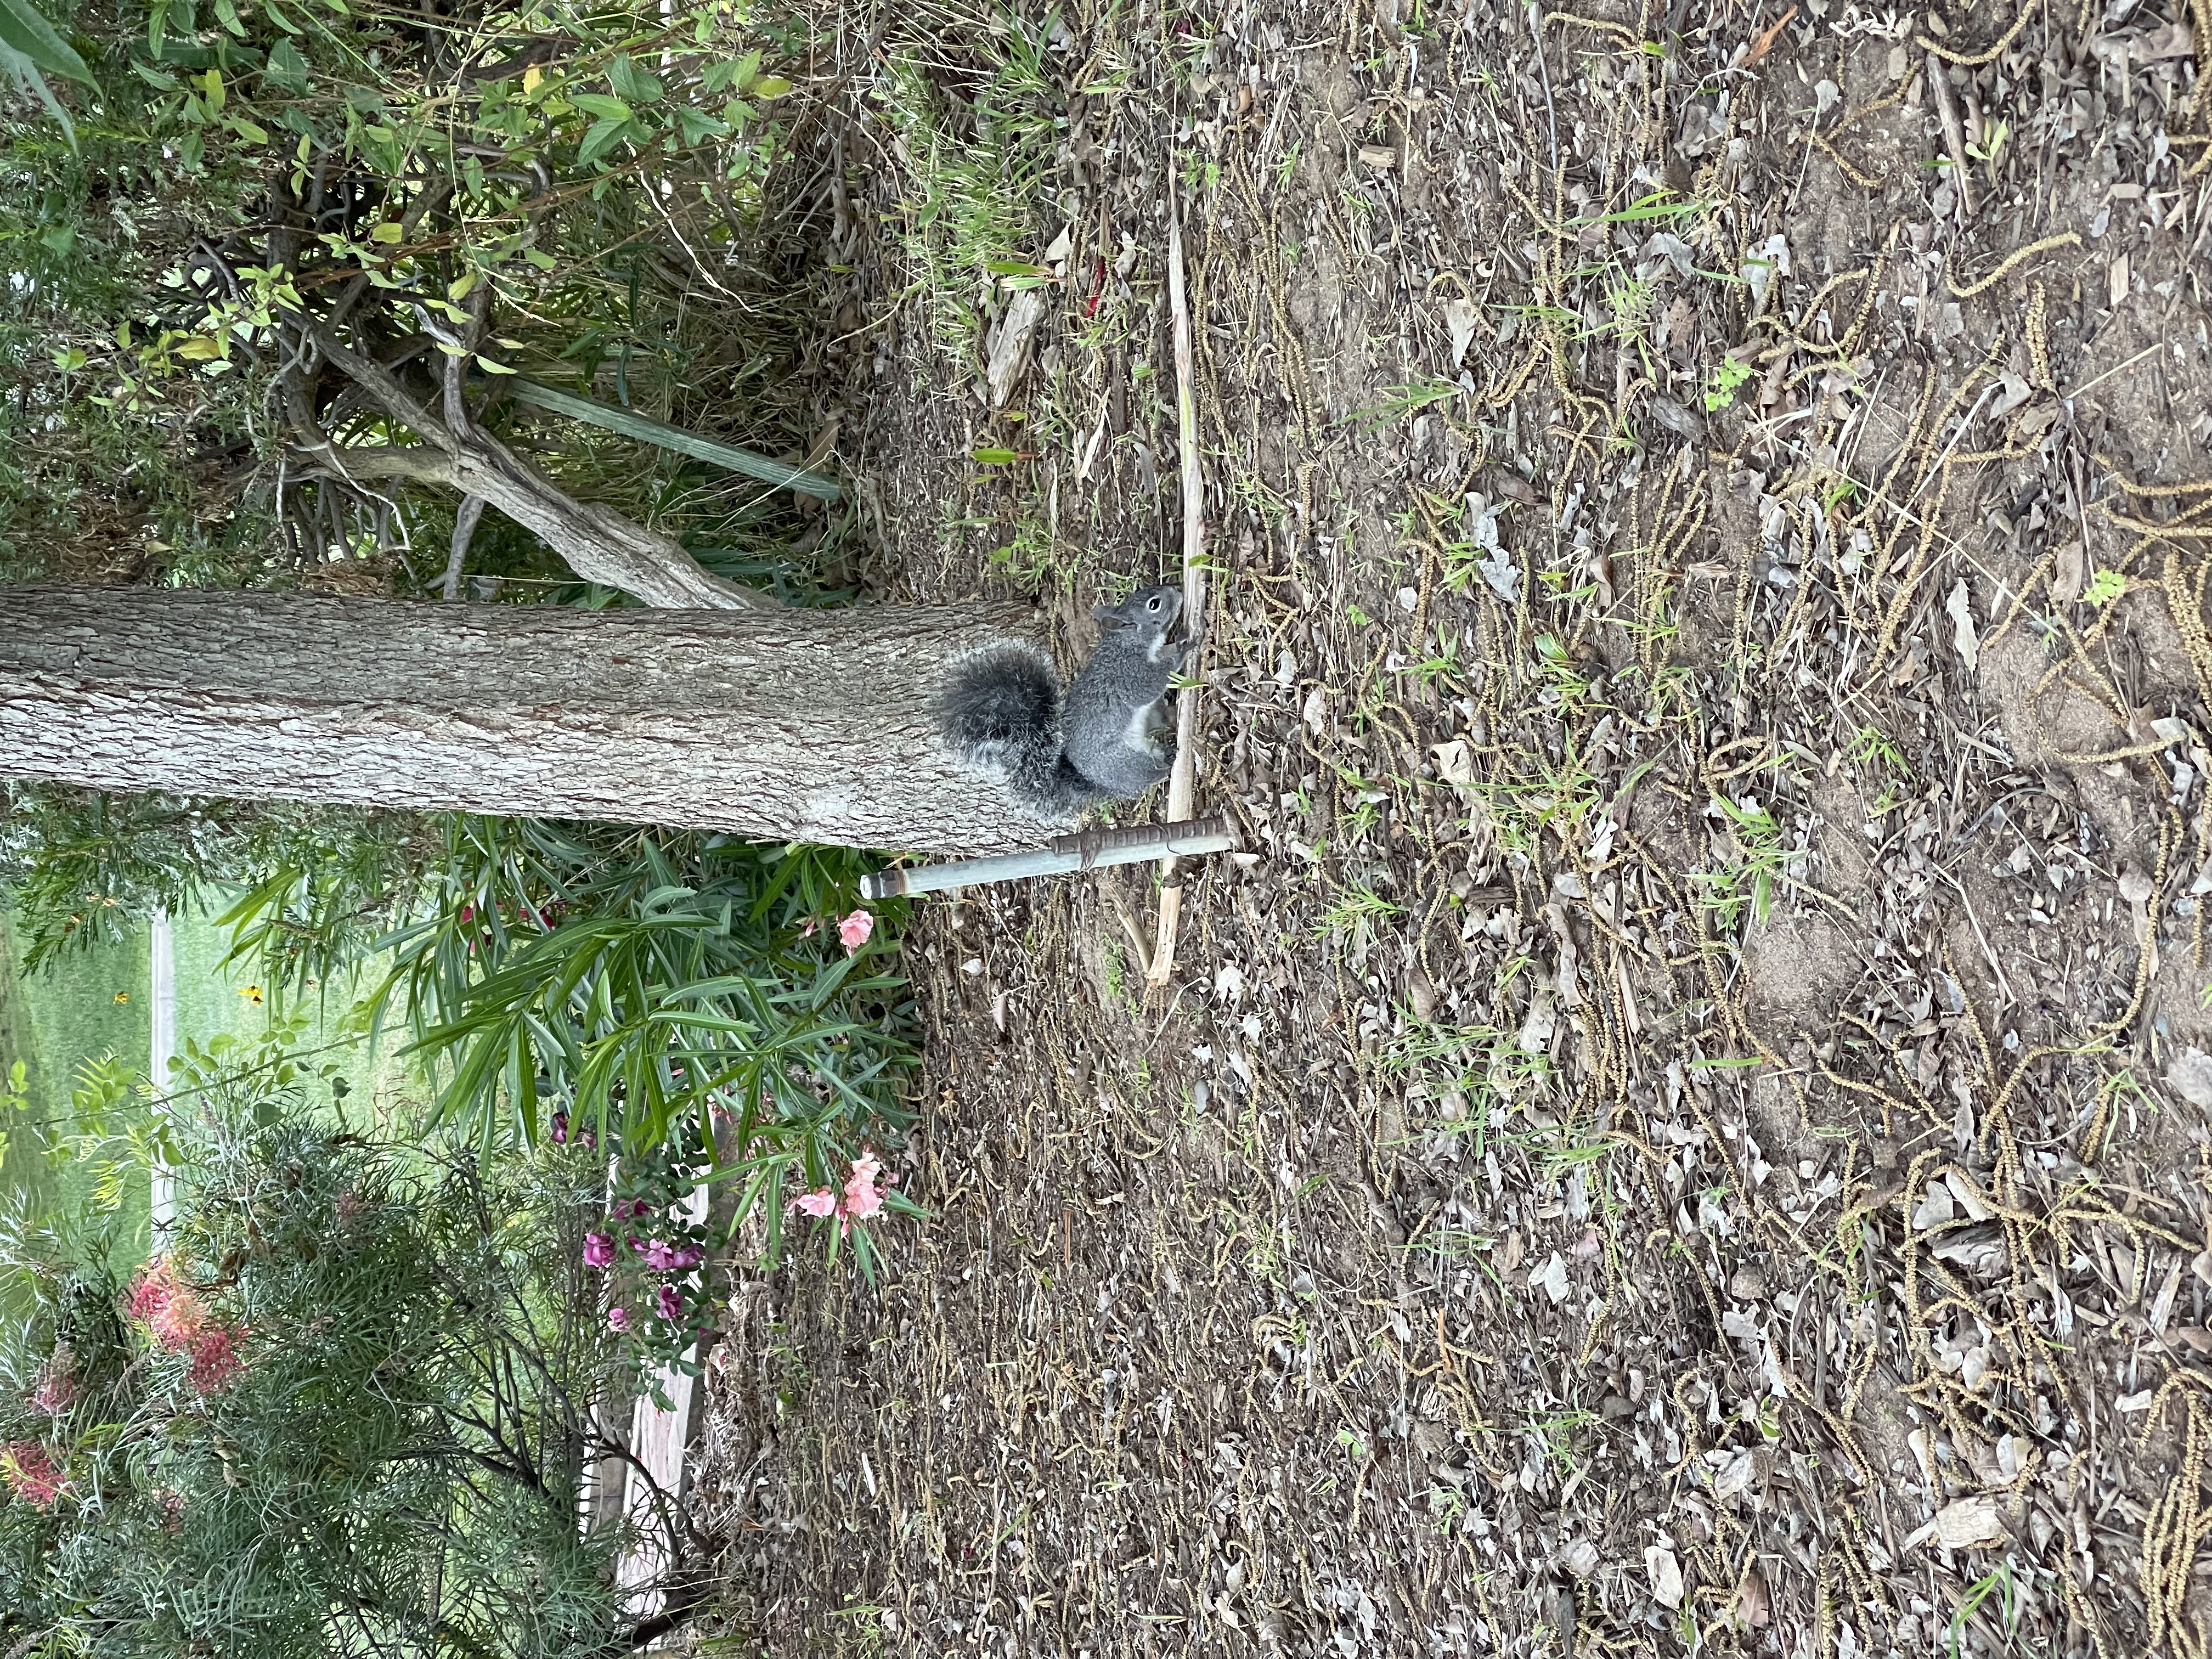 Squirrel, with stick